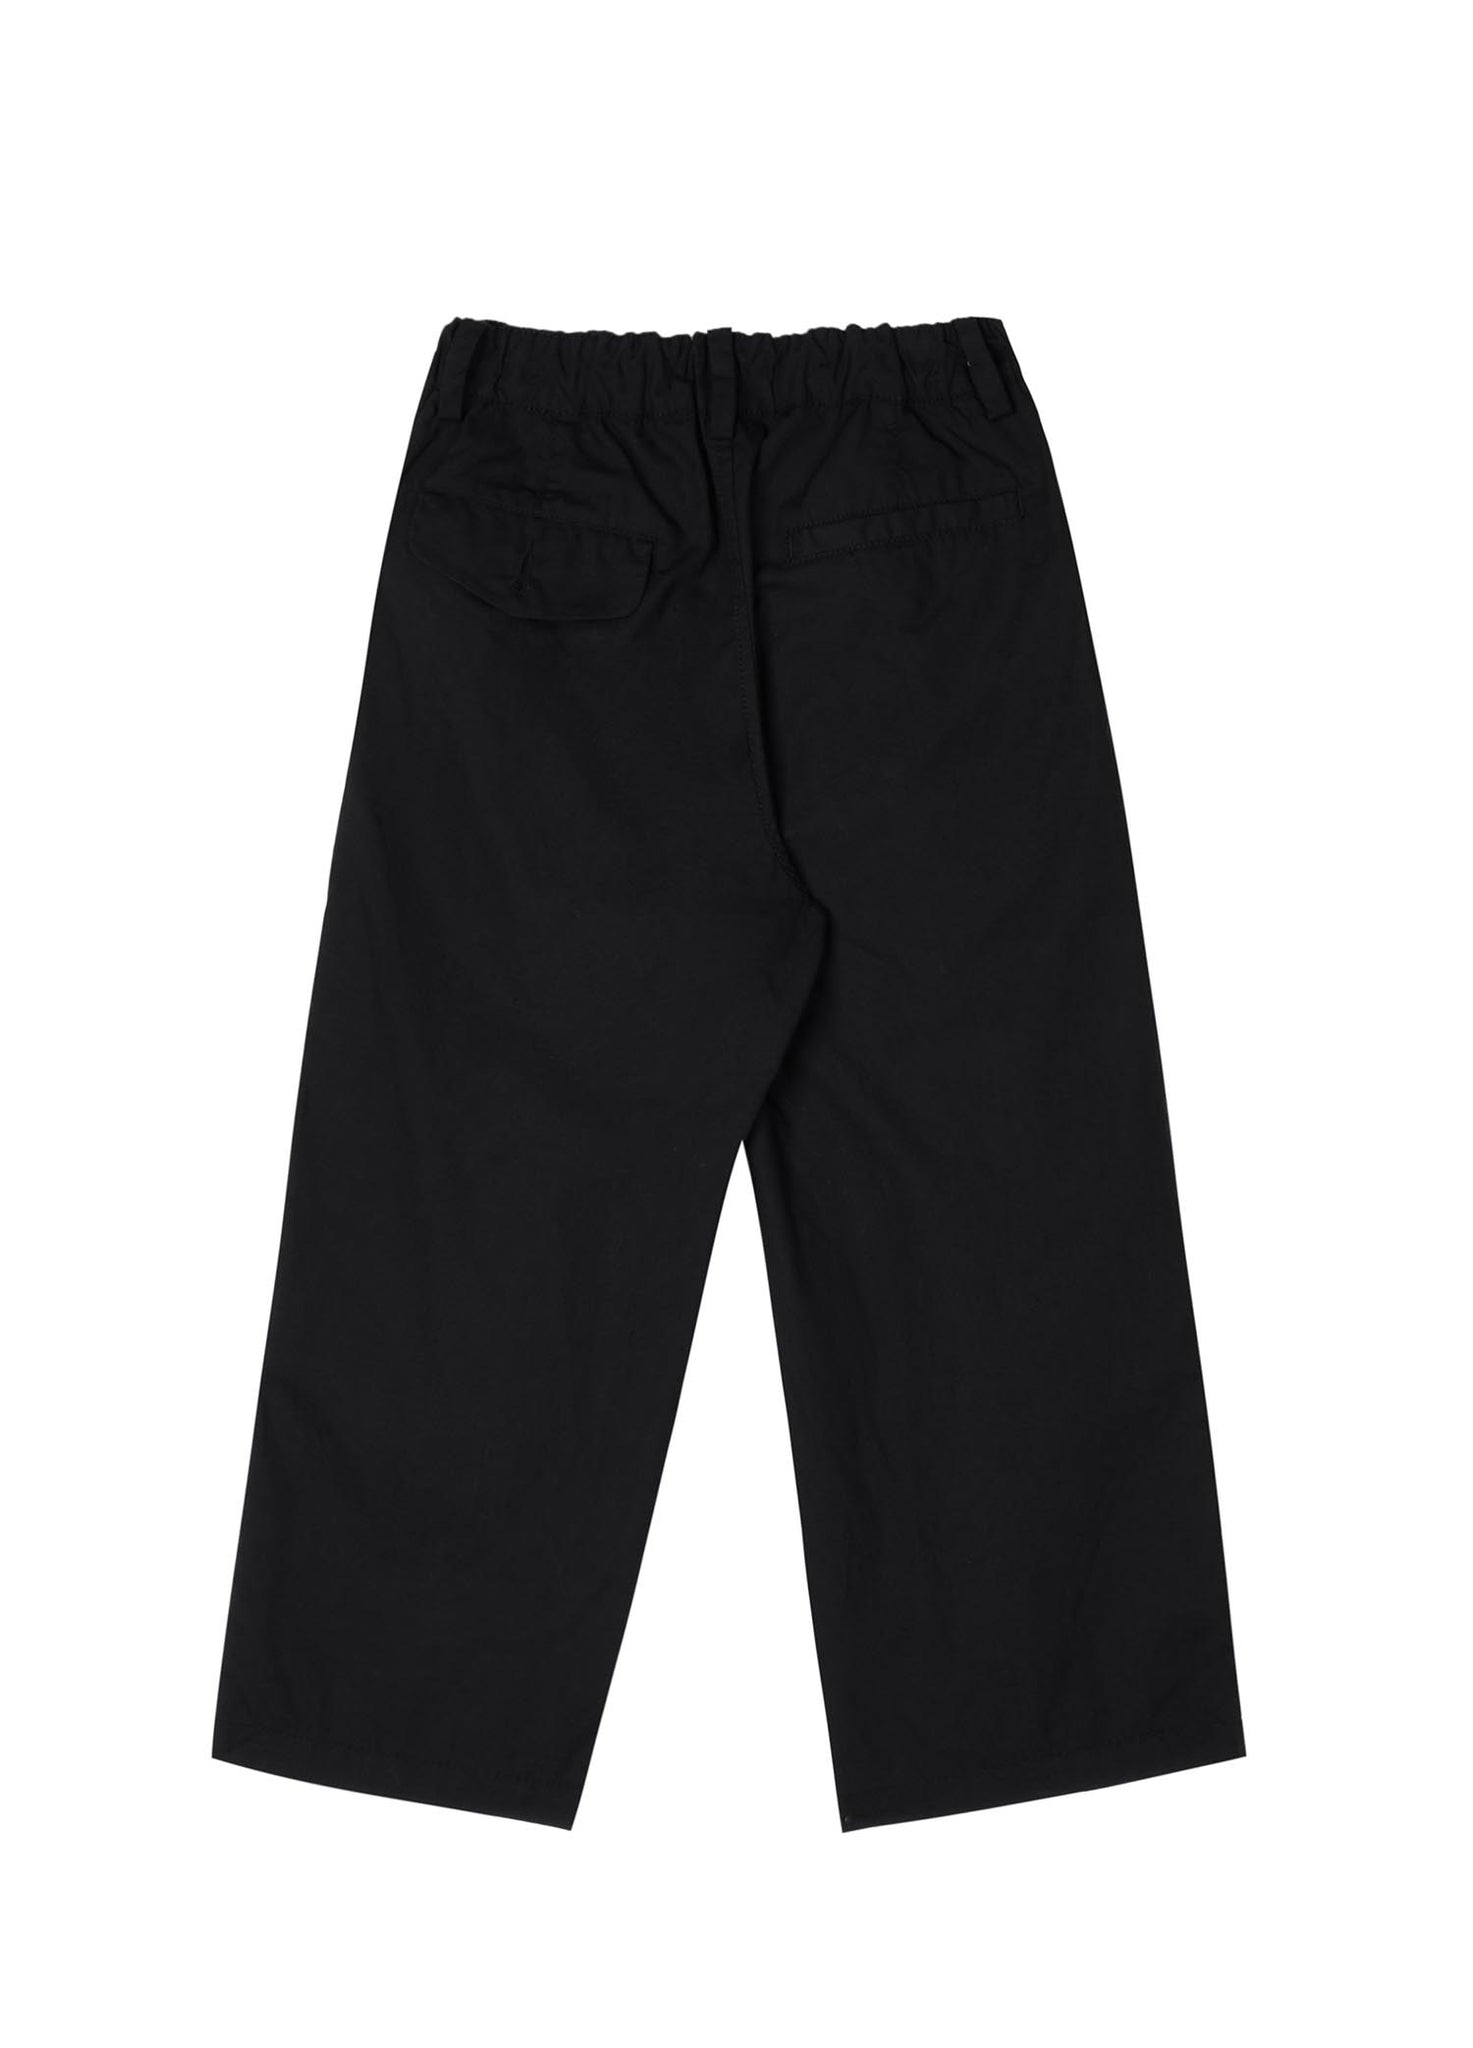 Pants / jnby by JNBY Solid Loose Fit Elasticated Waist Pants